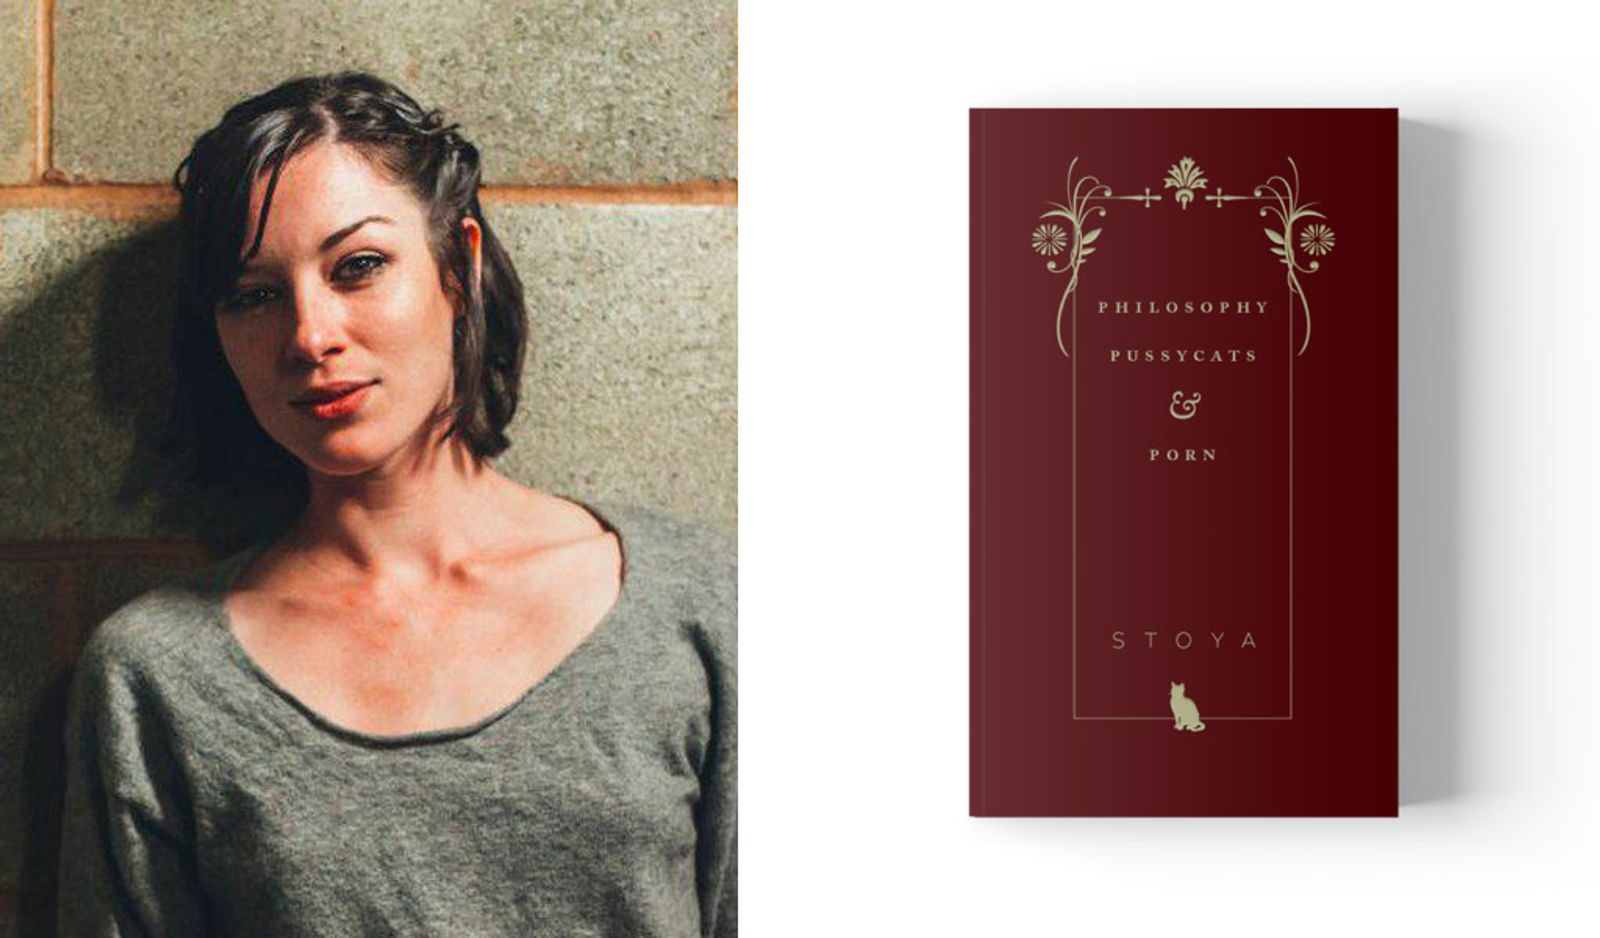 Stoya to Release Essay Anthology 'Philosophy, Pussycats & Porn'